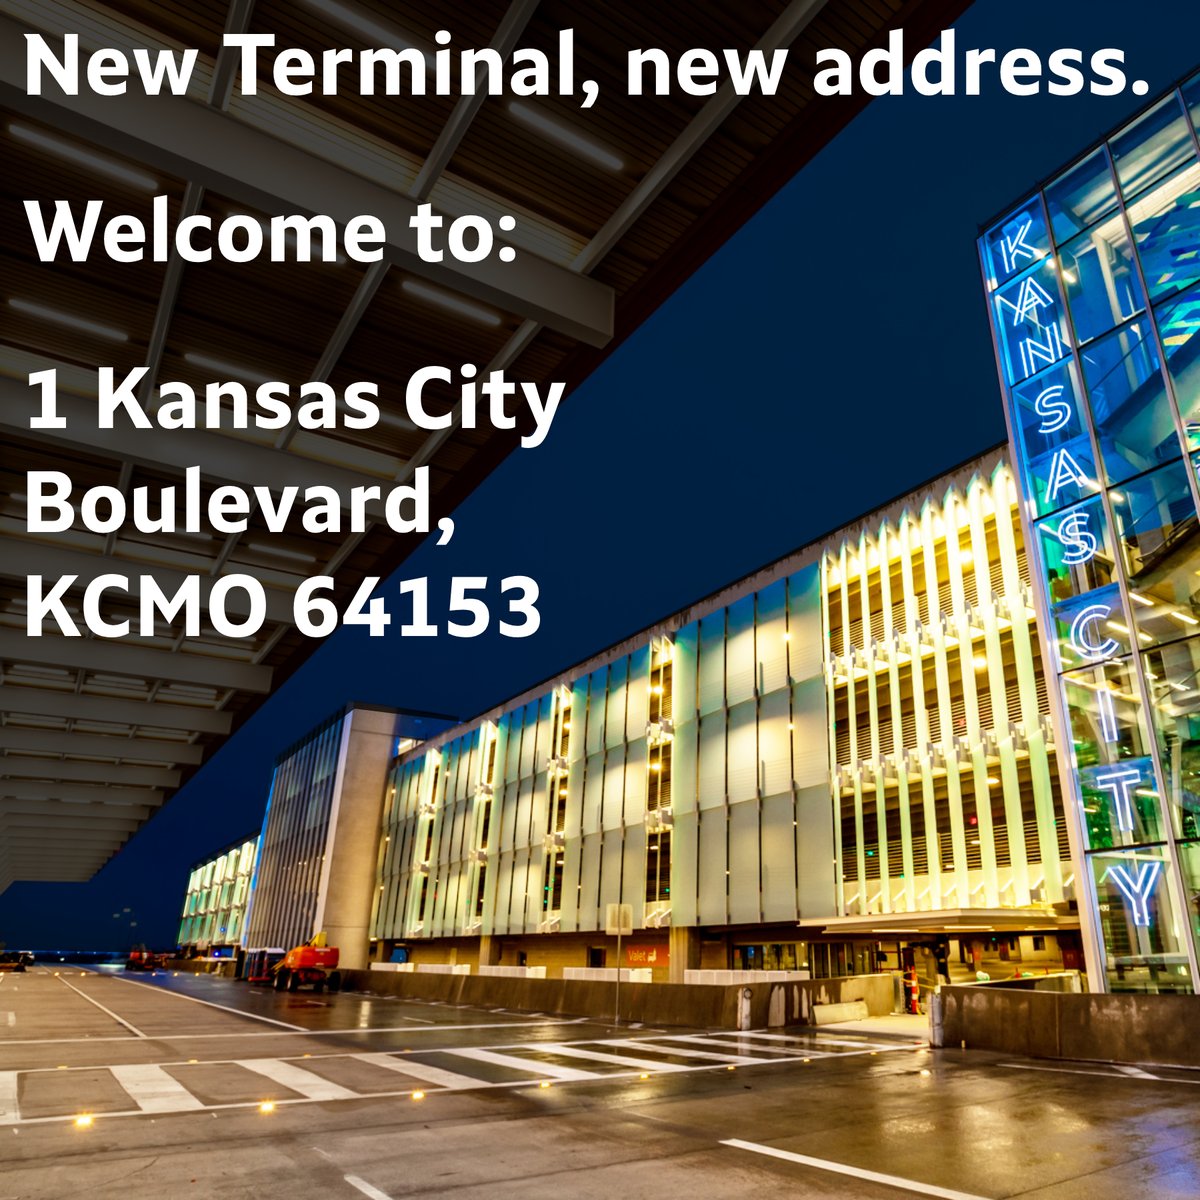 The new front step to Kansas City! Please note our new address for travelers driving to the airport.